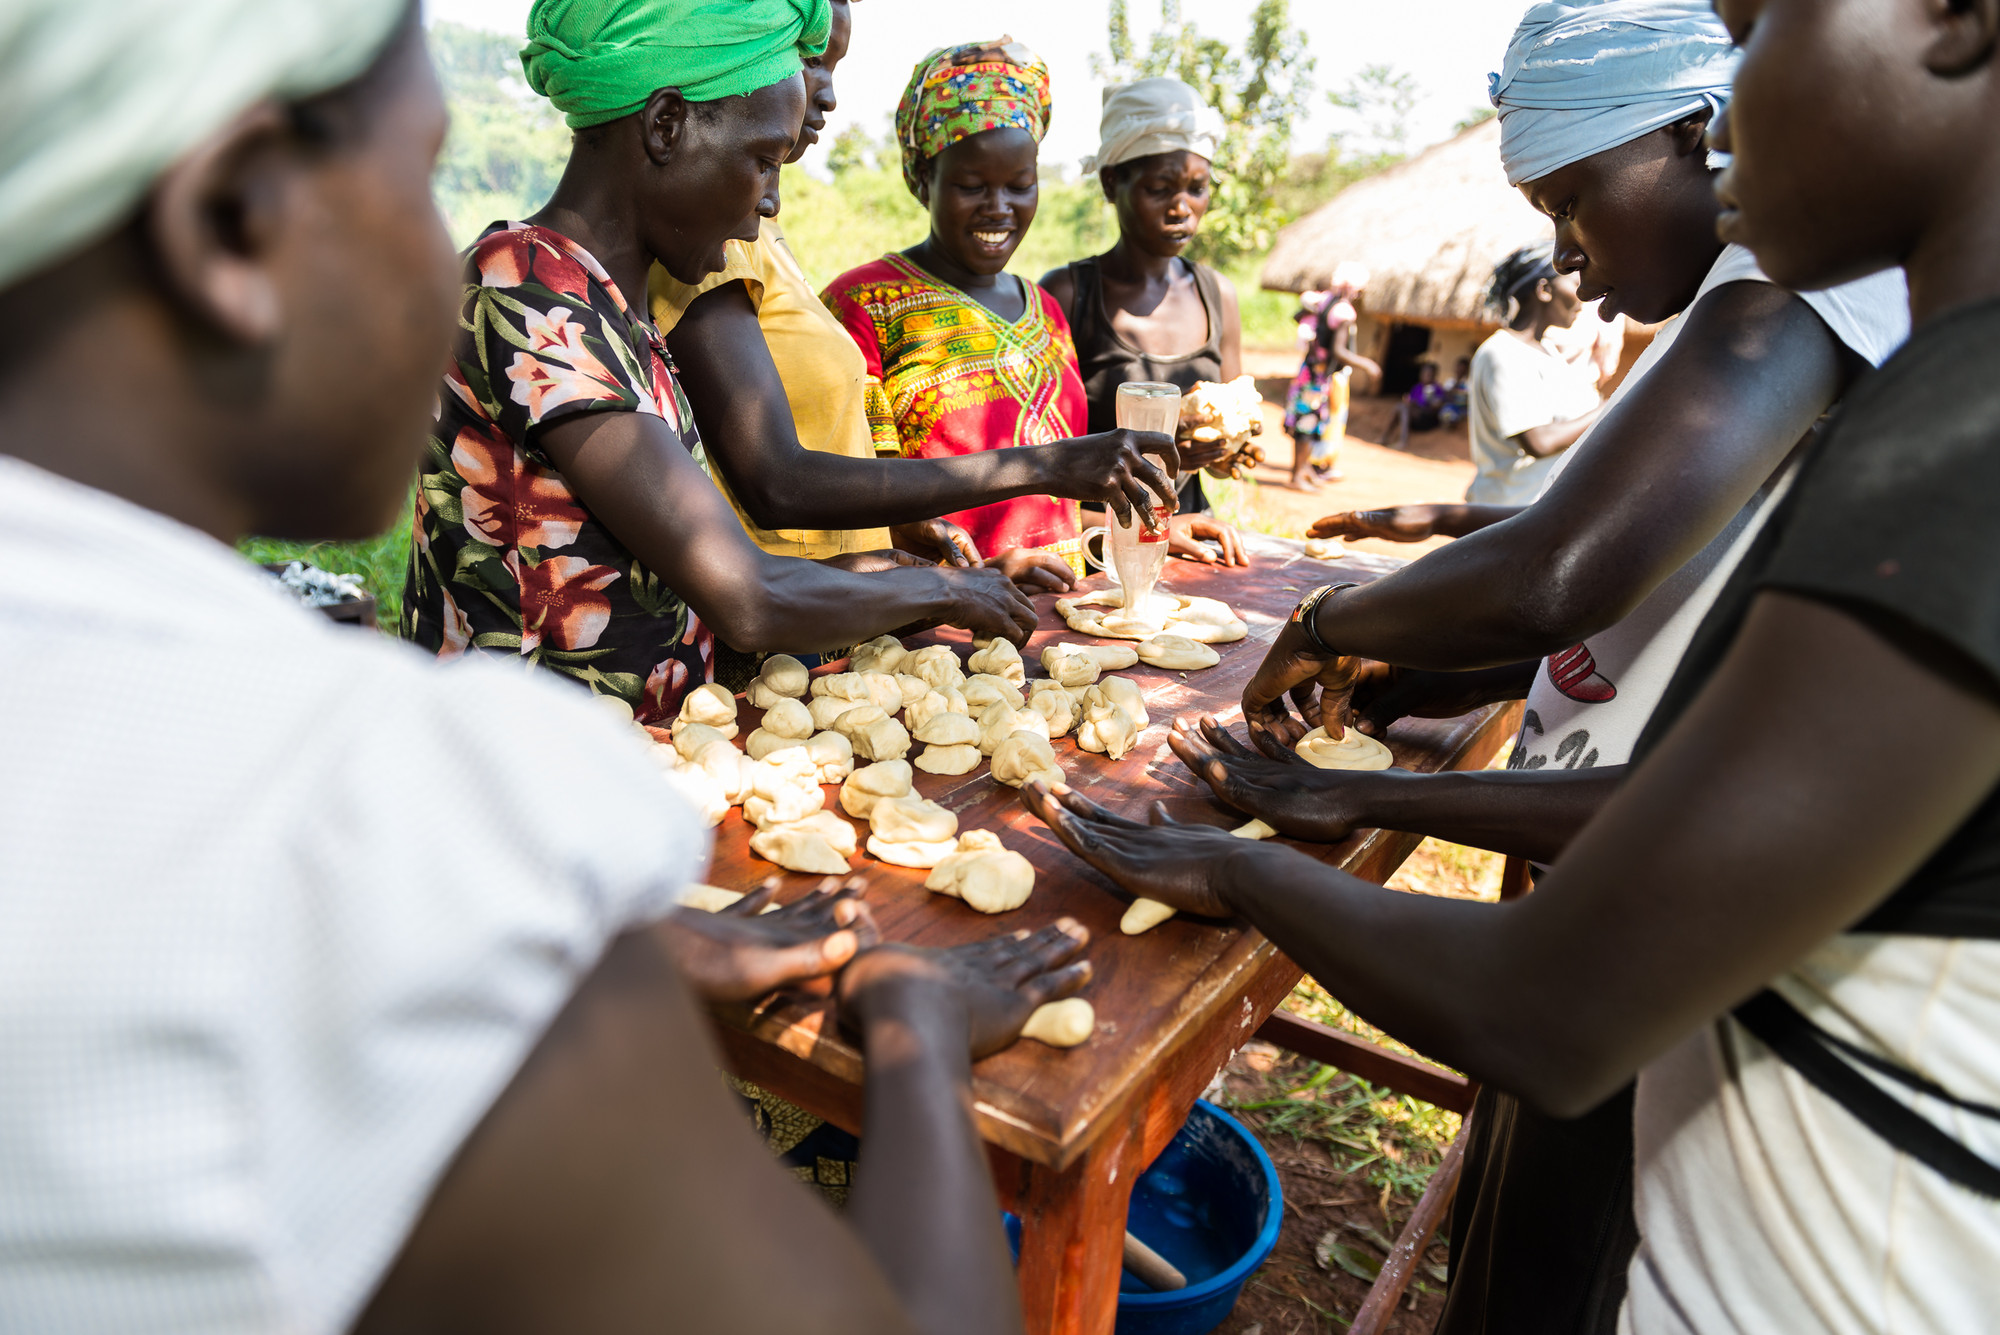 Women participating in their social empowerment training on bakery skills in South Sudan. Photo Credit: Charles Atiki Lomodong